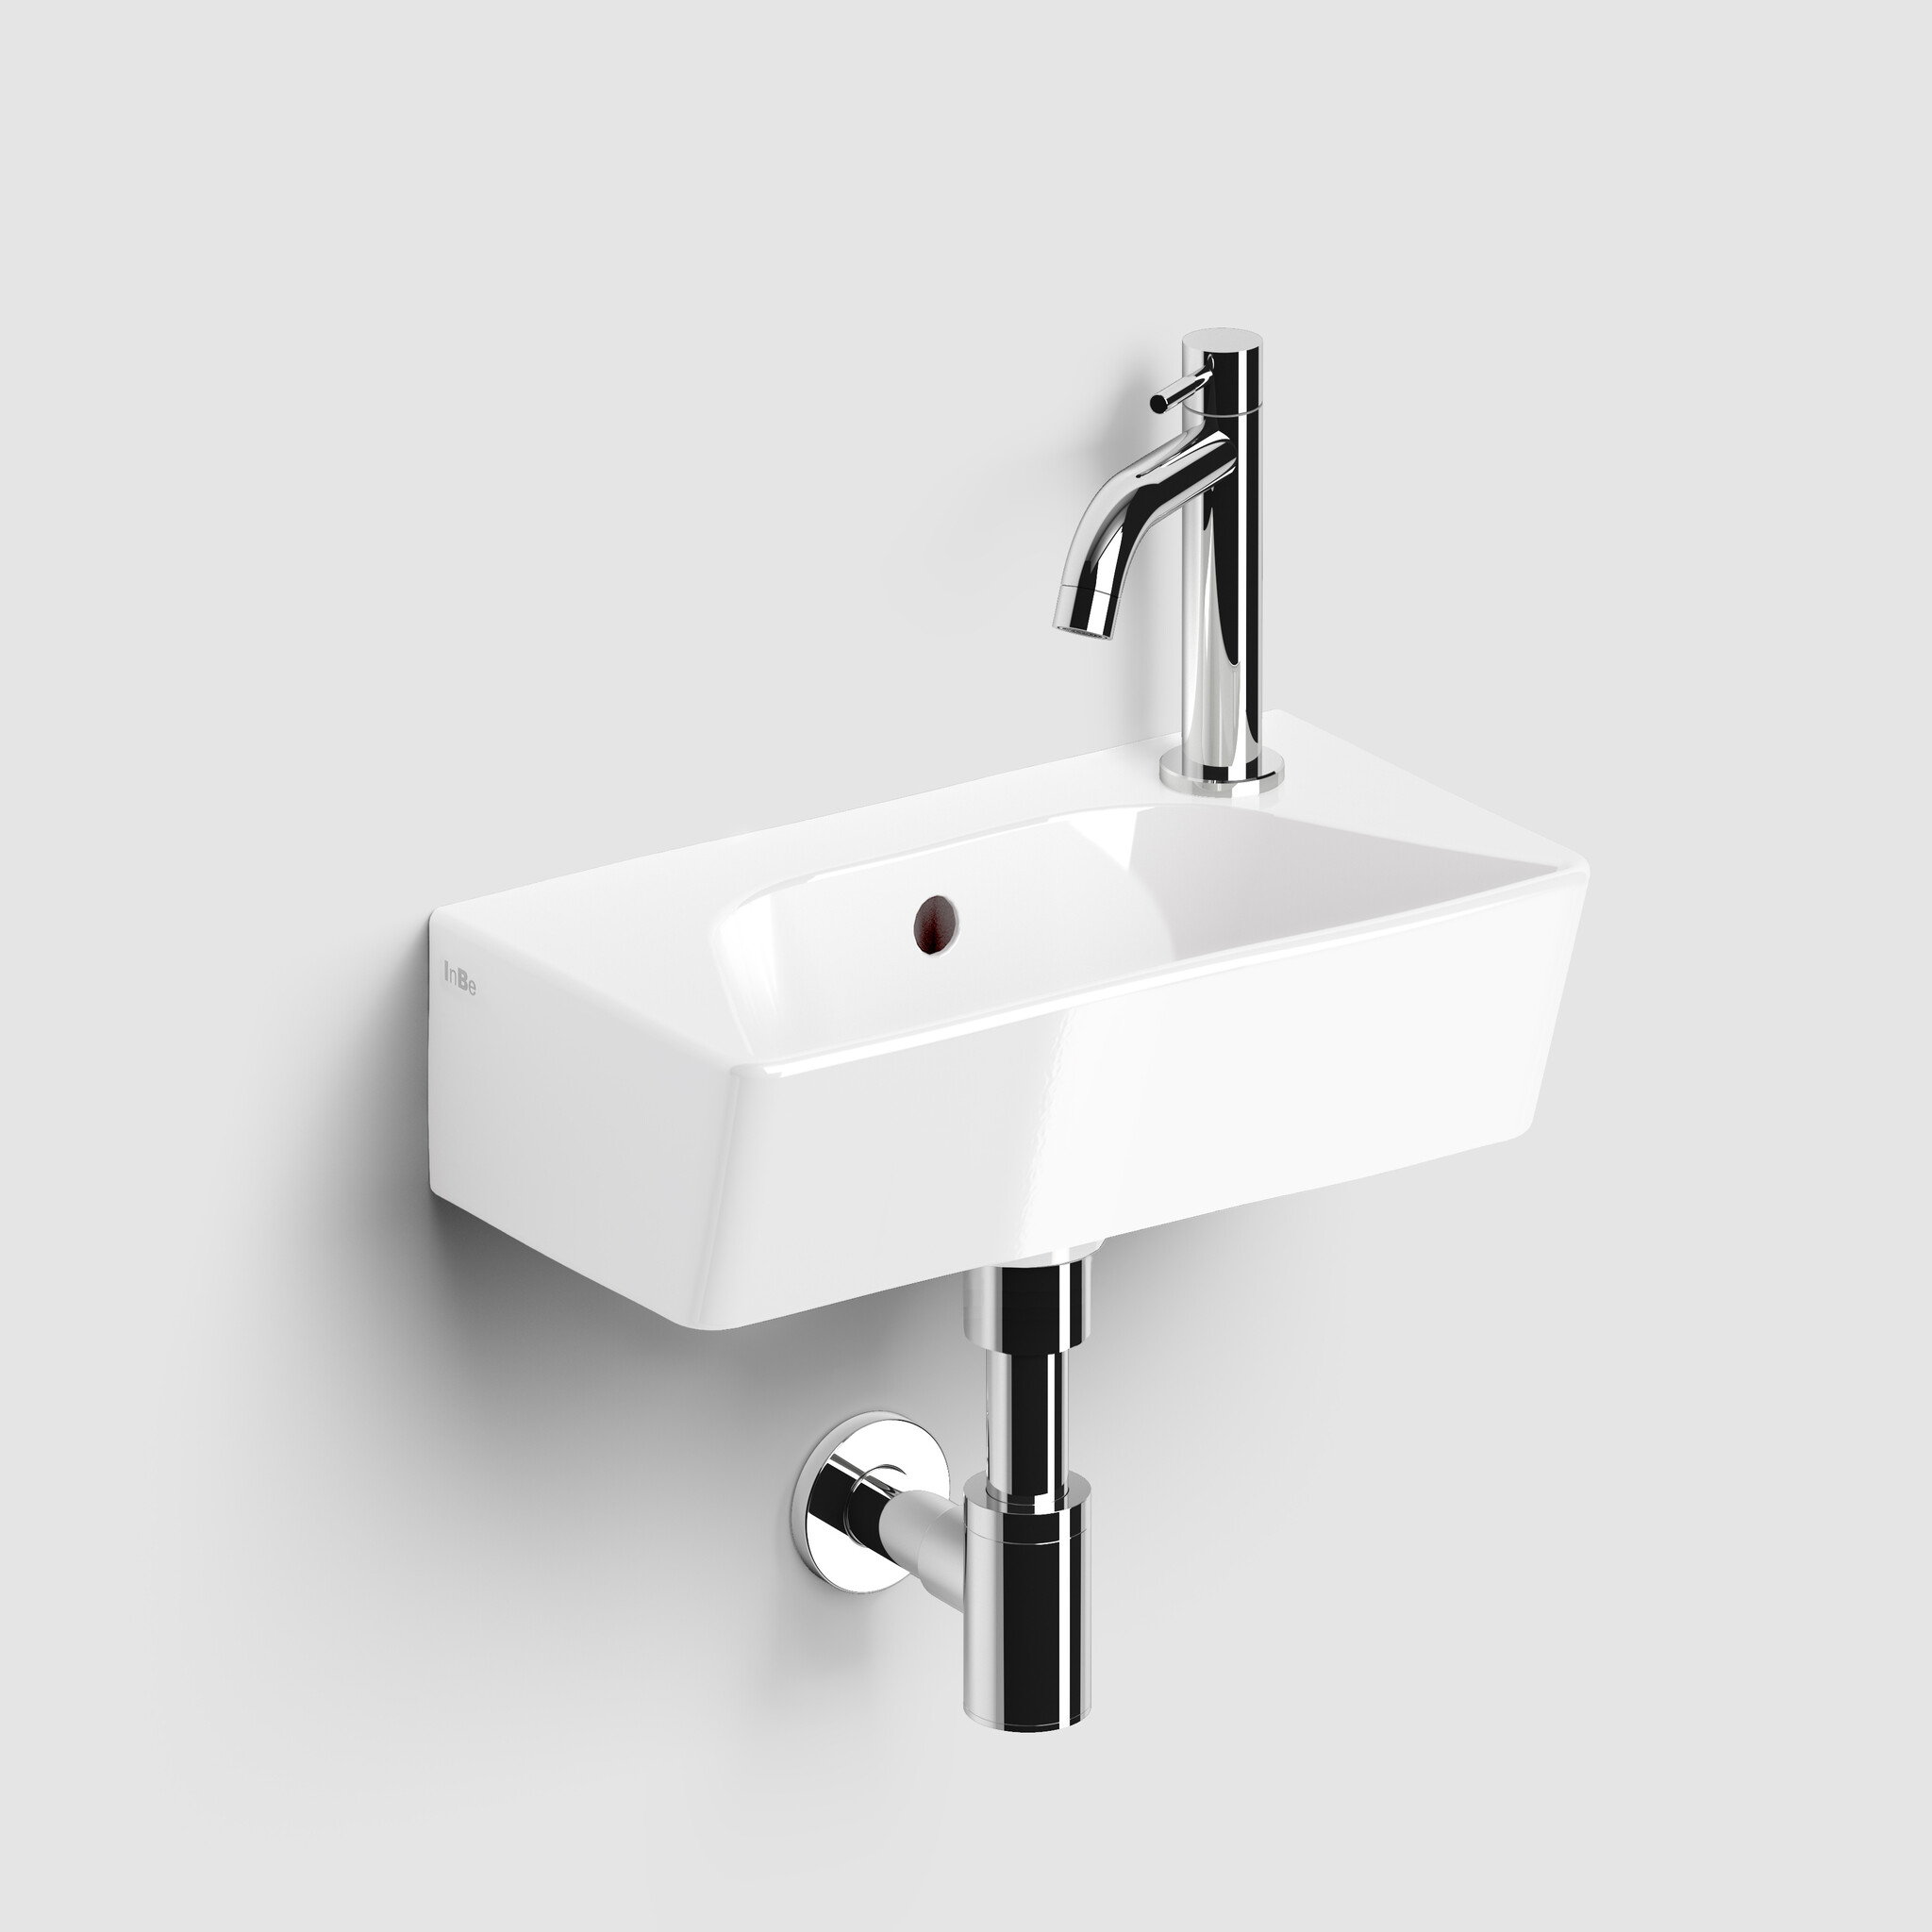 InBe InBe 6 handbasin, with taphole, without drain, white ceramic